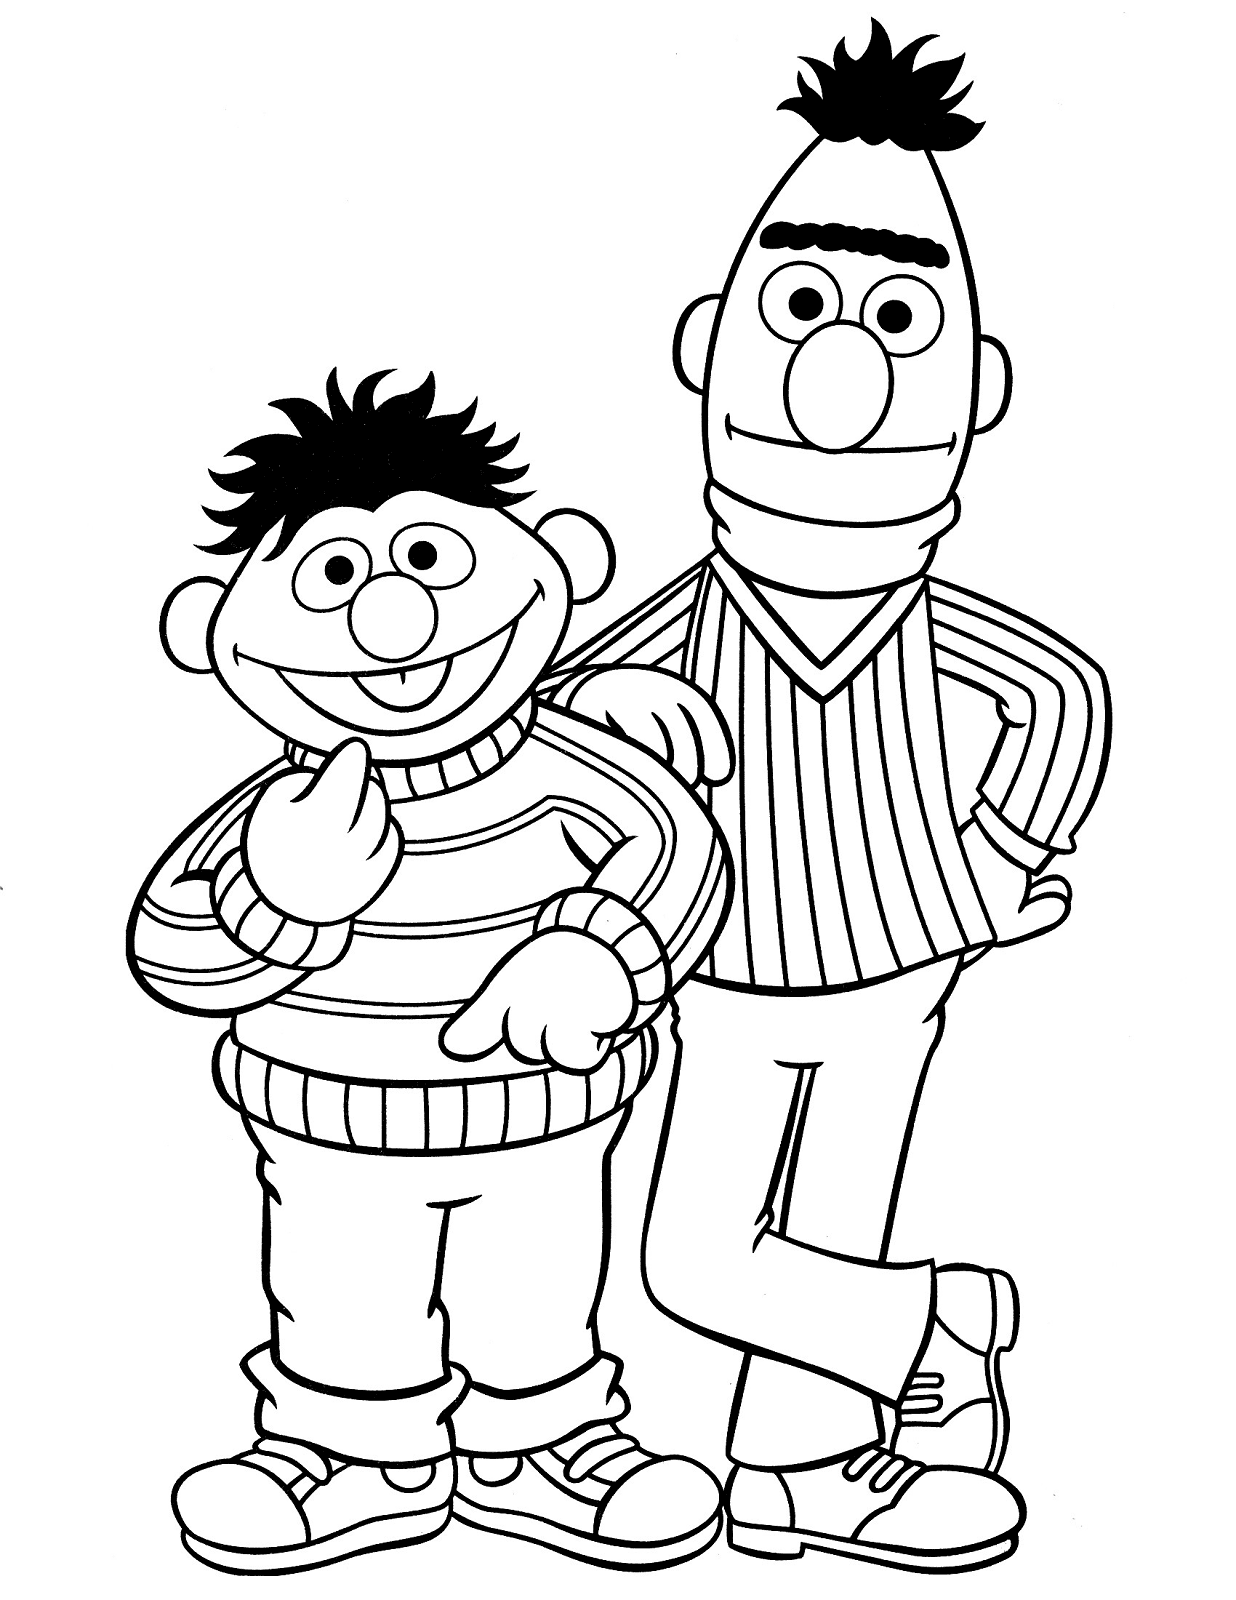 Sesame Street Bert and Ernie Coloring Page